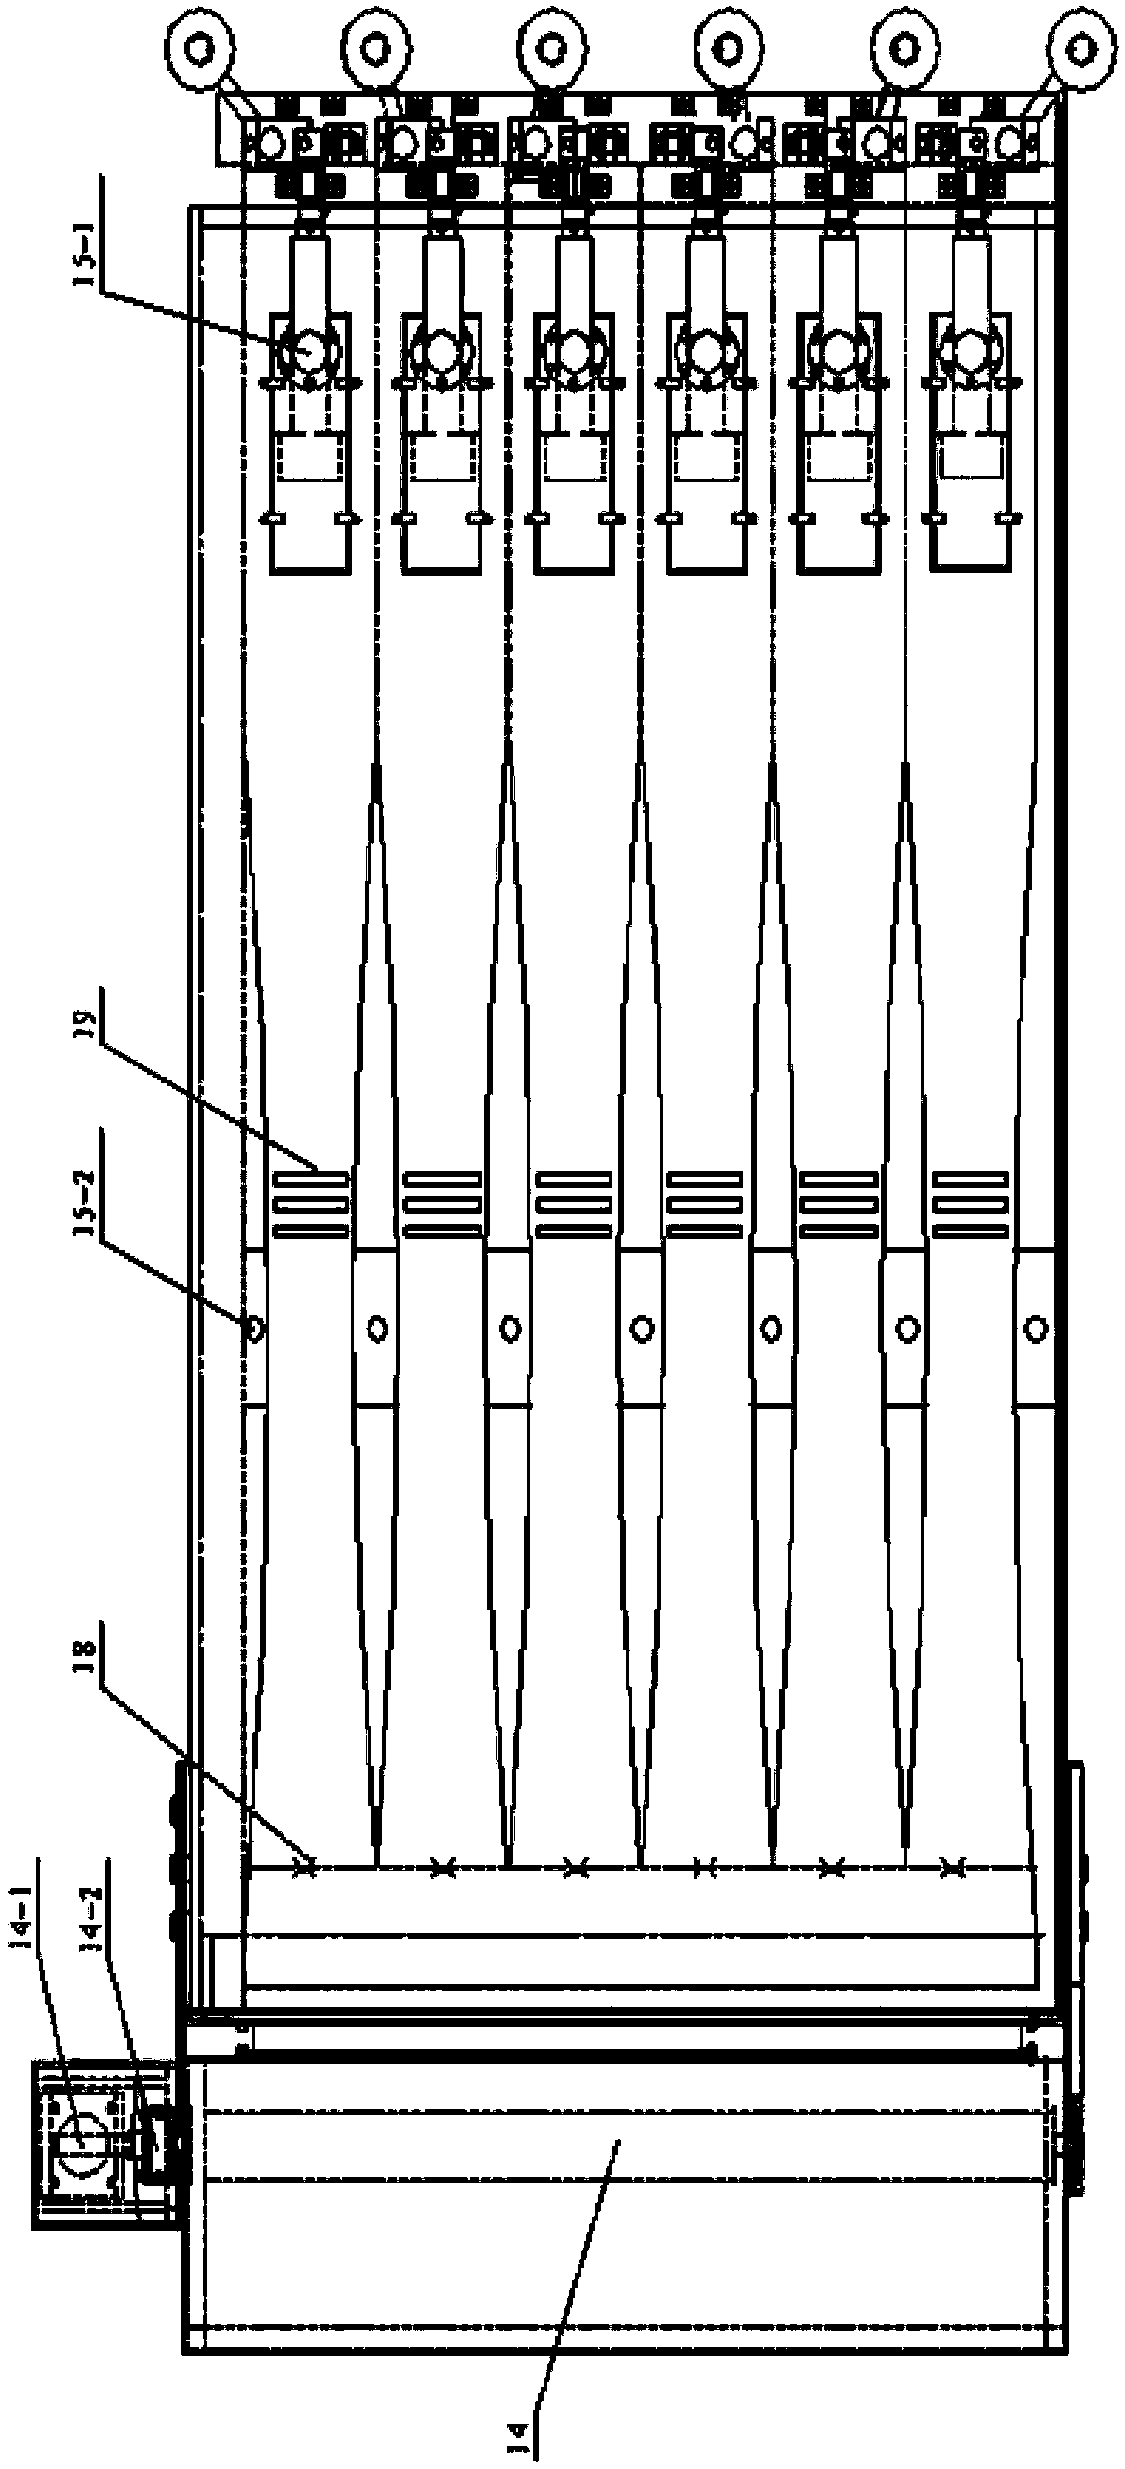 Wet spinning forming device